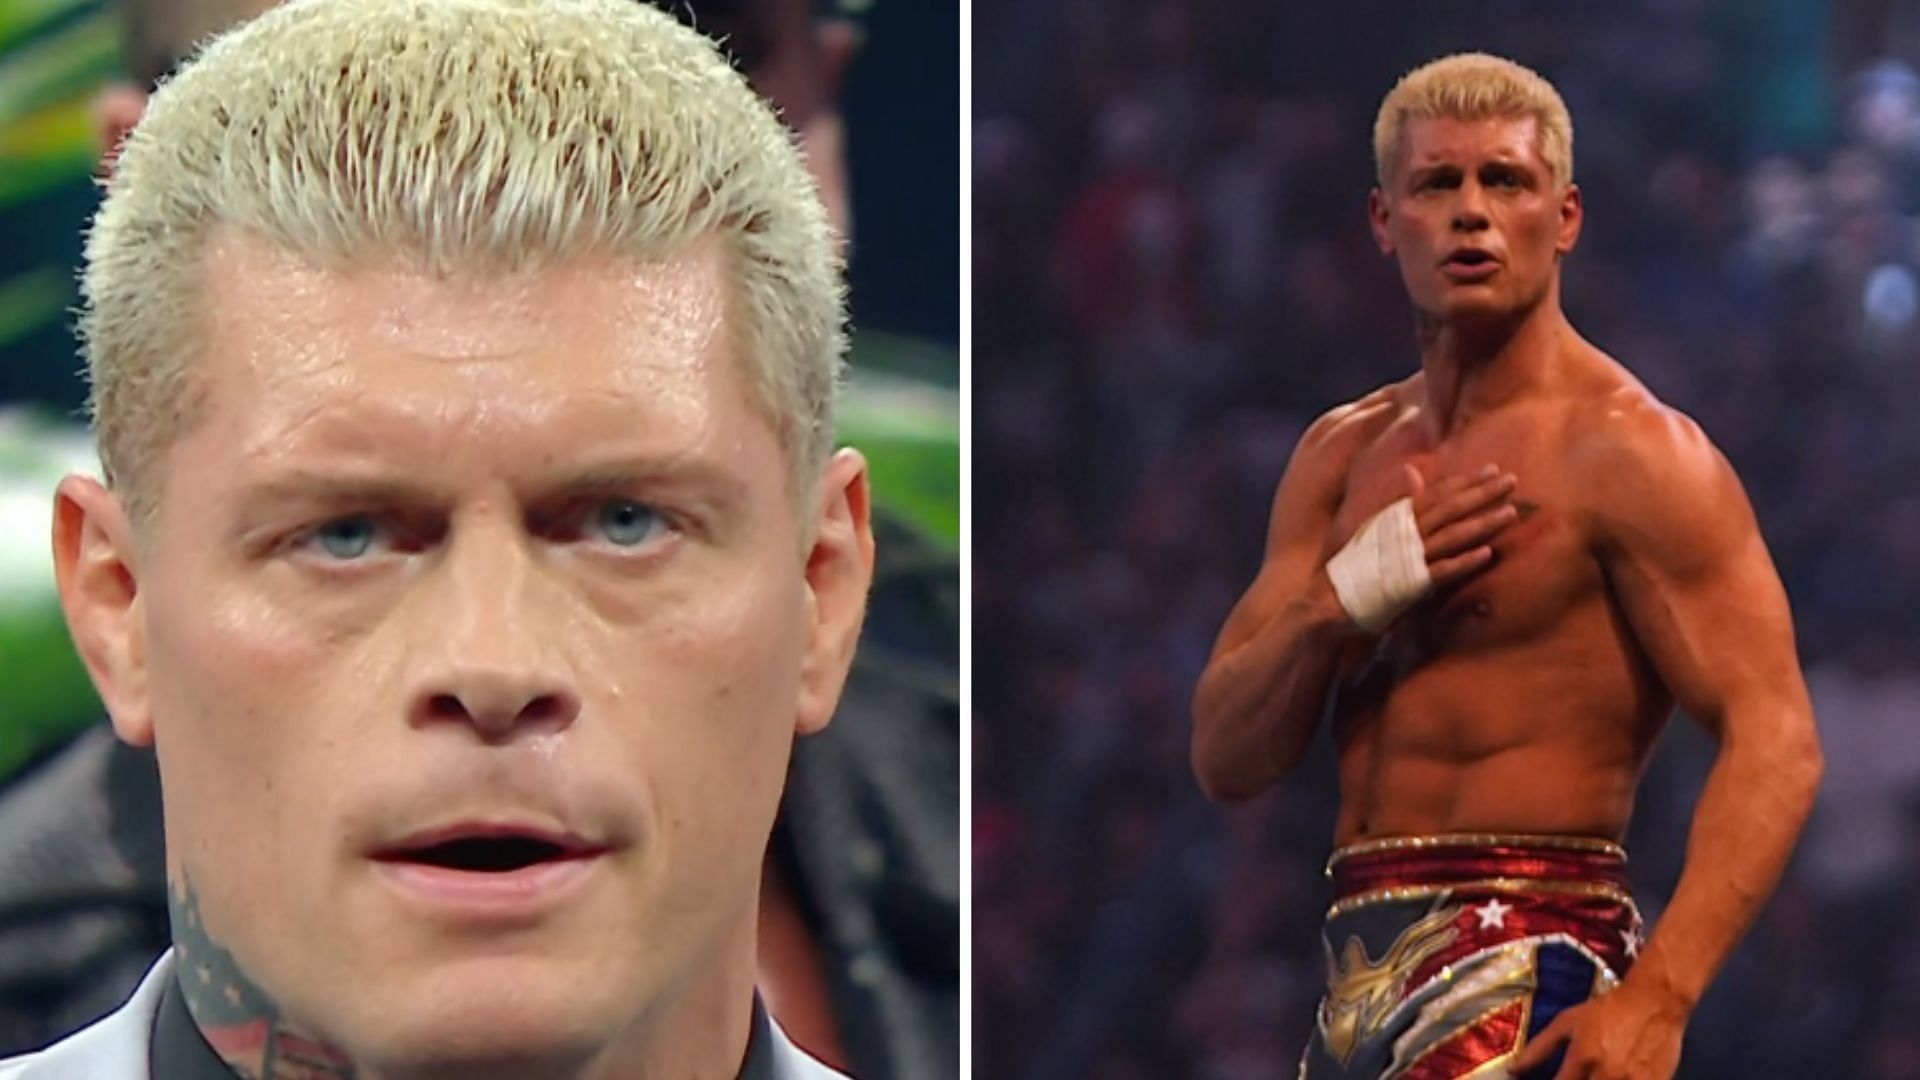 Cody Rhodes is set to lock horns with Roman Reigns at WrestleMania XL [Image credits: Rhodes